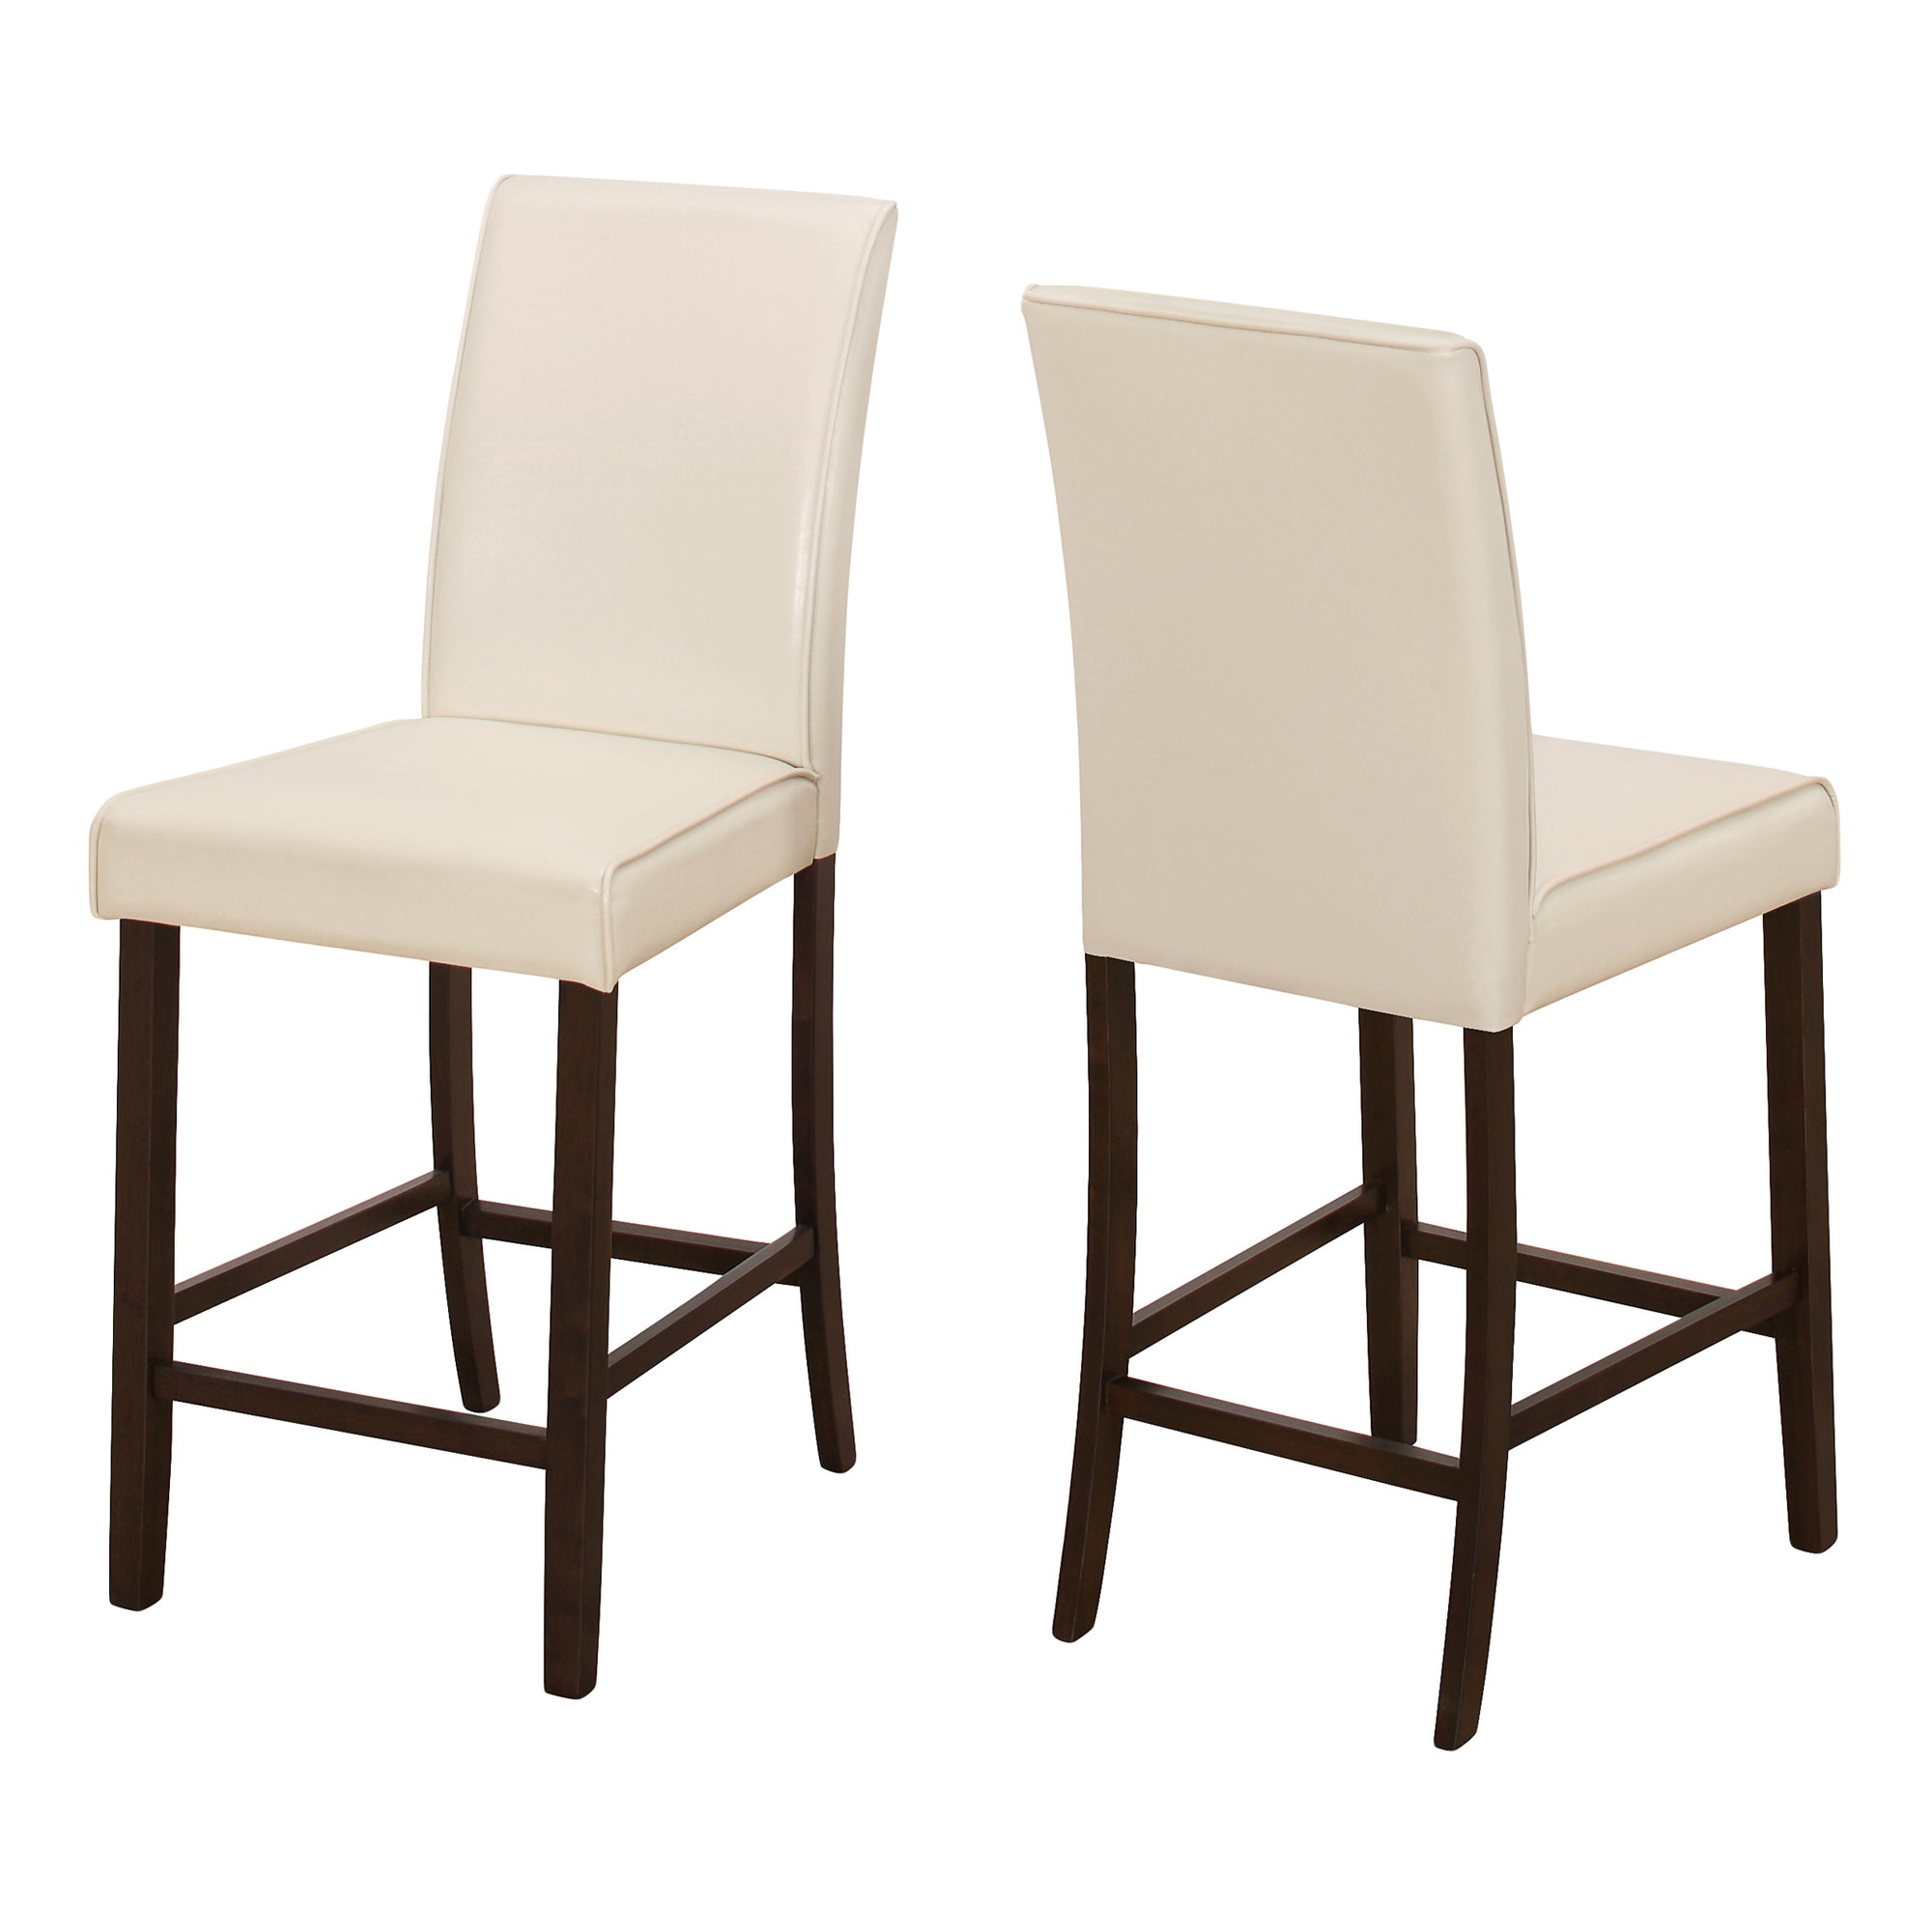 Kacy Counter Height Dining Chair With Footrest (Set of 2 - Ivory)